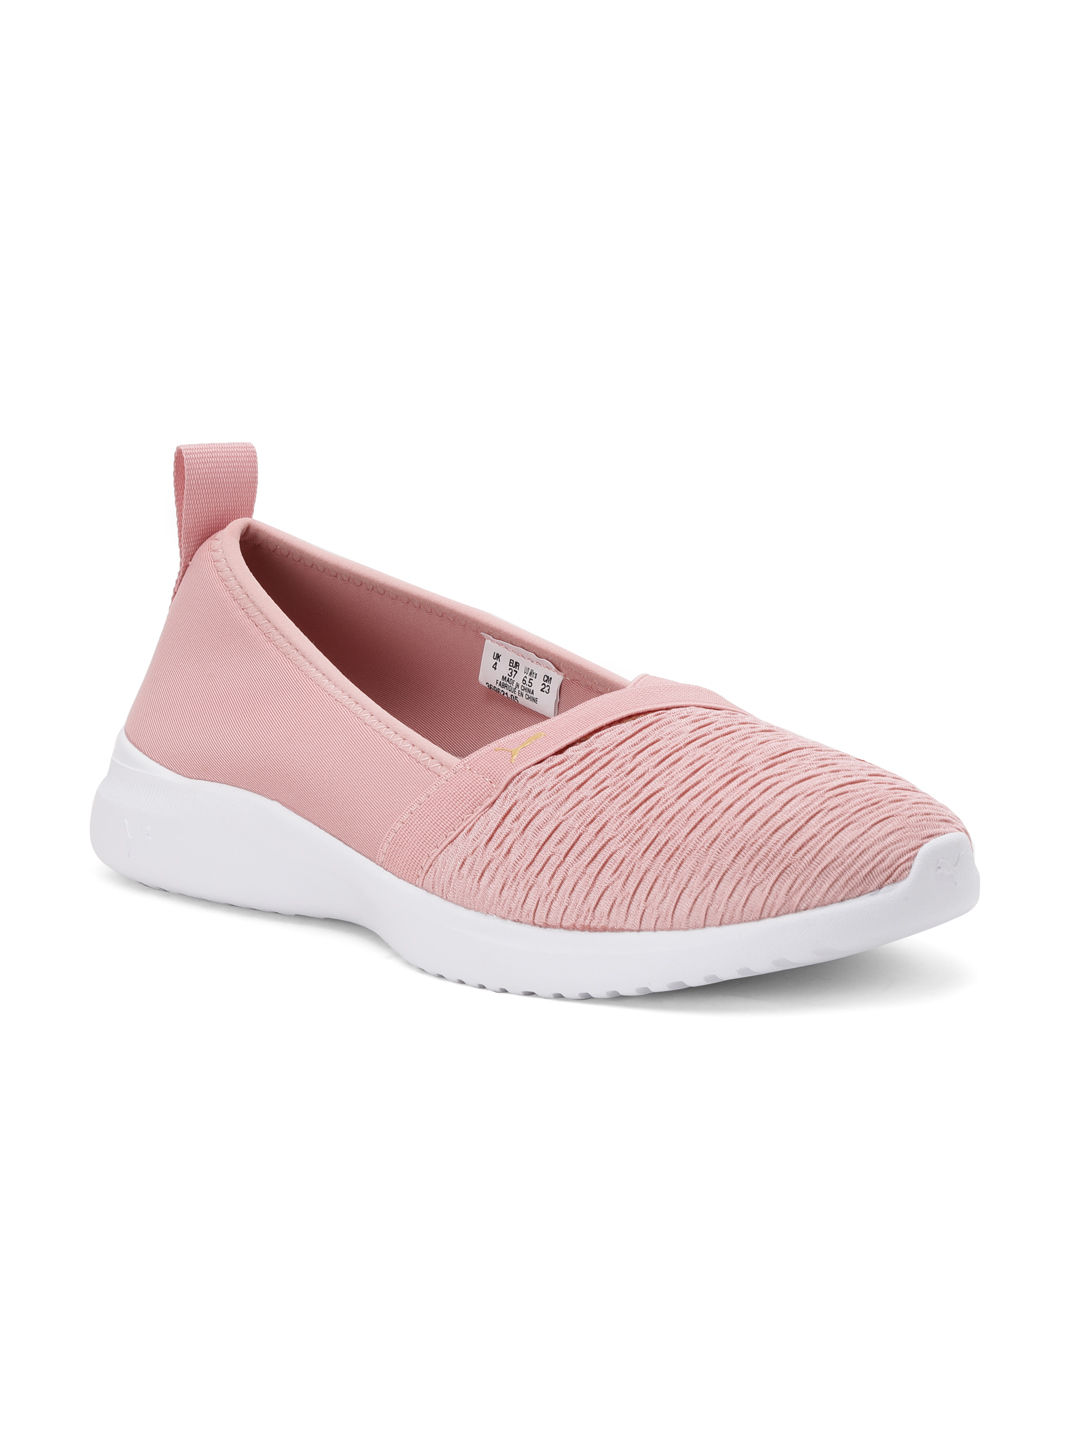 Puma Adelina Women Casual Shoes - Coral 